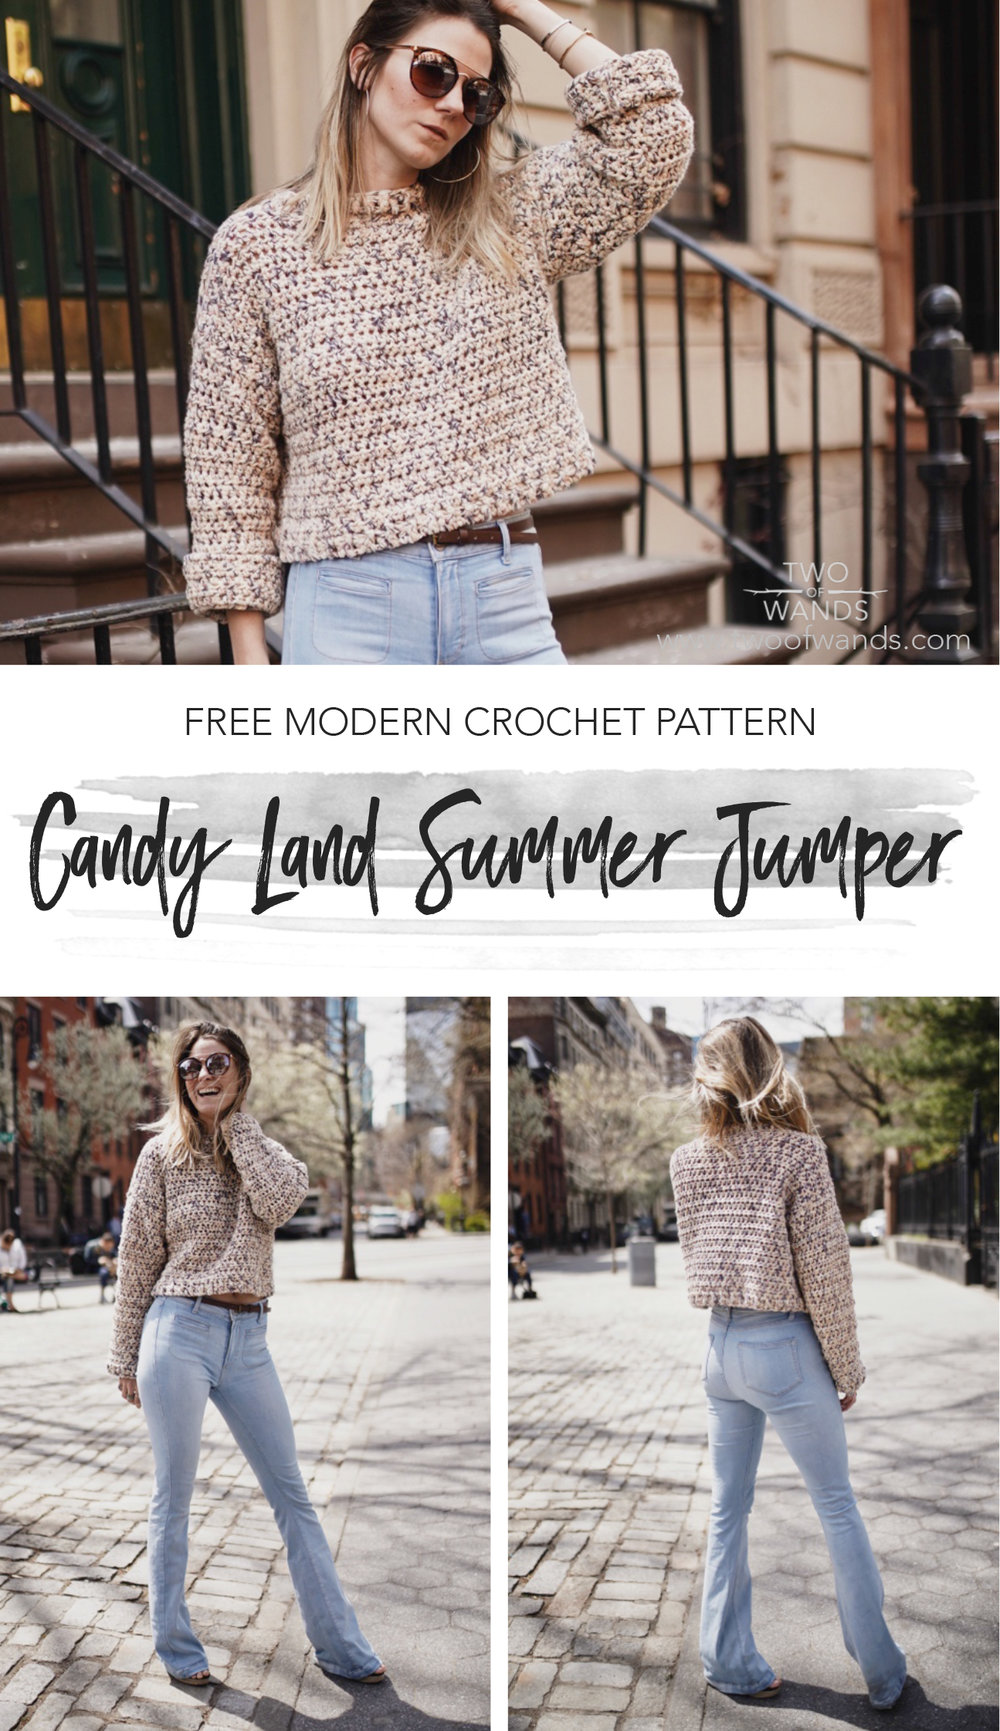 Candy Land Summer Jumper pattern by Two of Wands